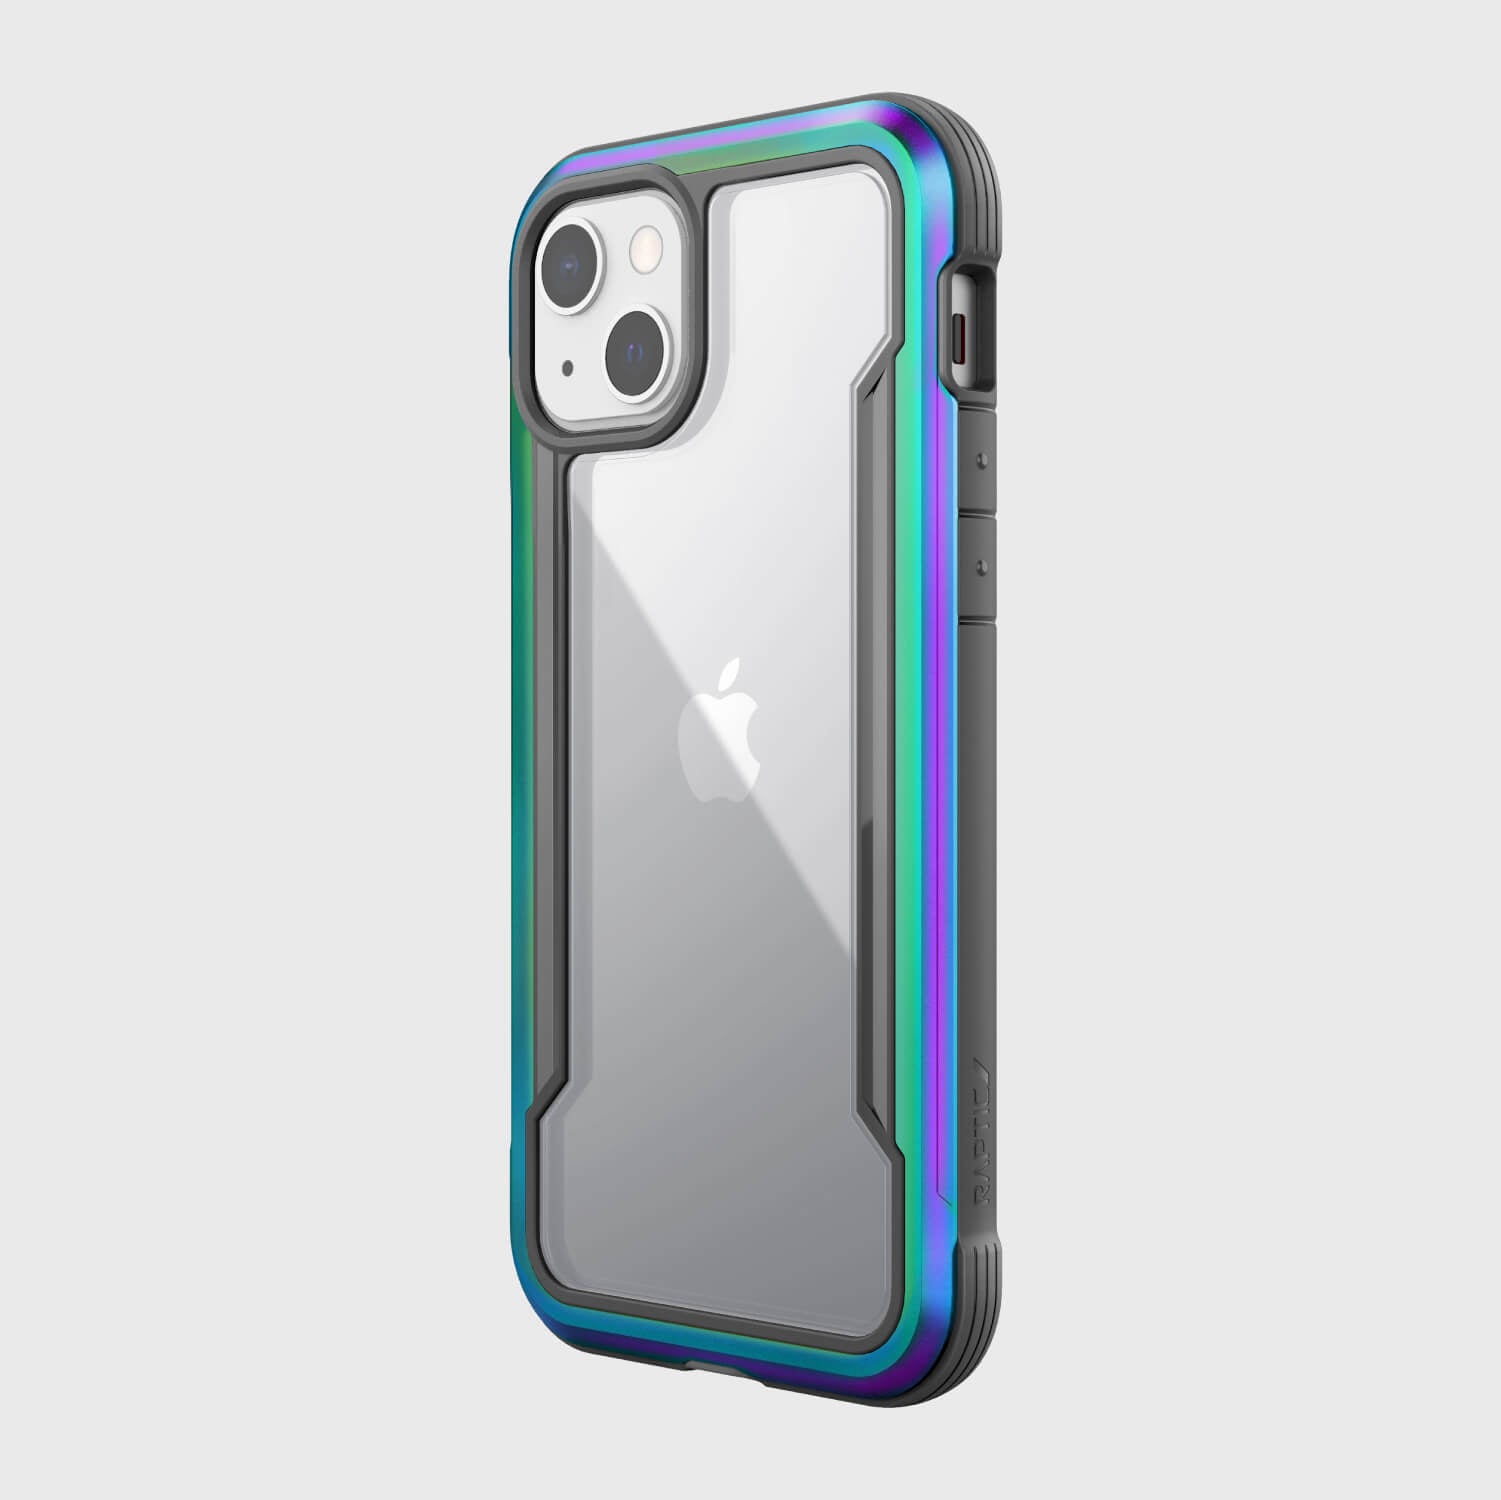 The back of an iPhone 13 Mini Case - SHIELD PRO with a rainbow colored back.